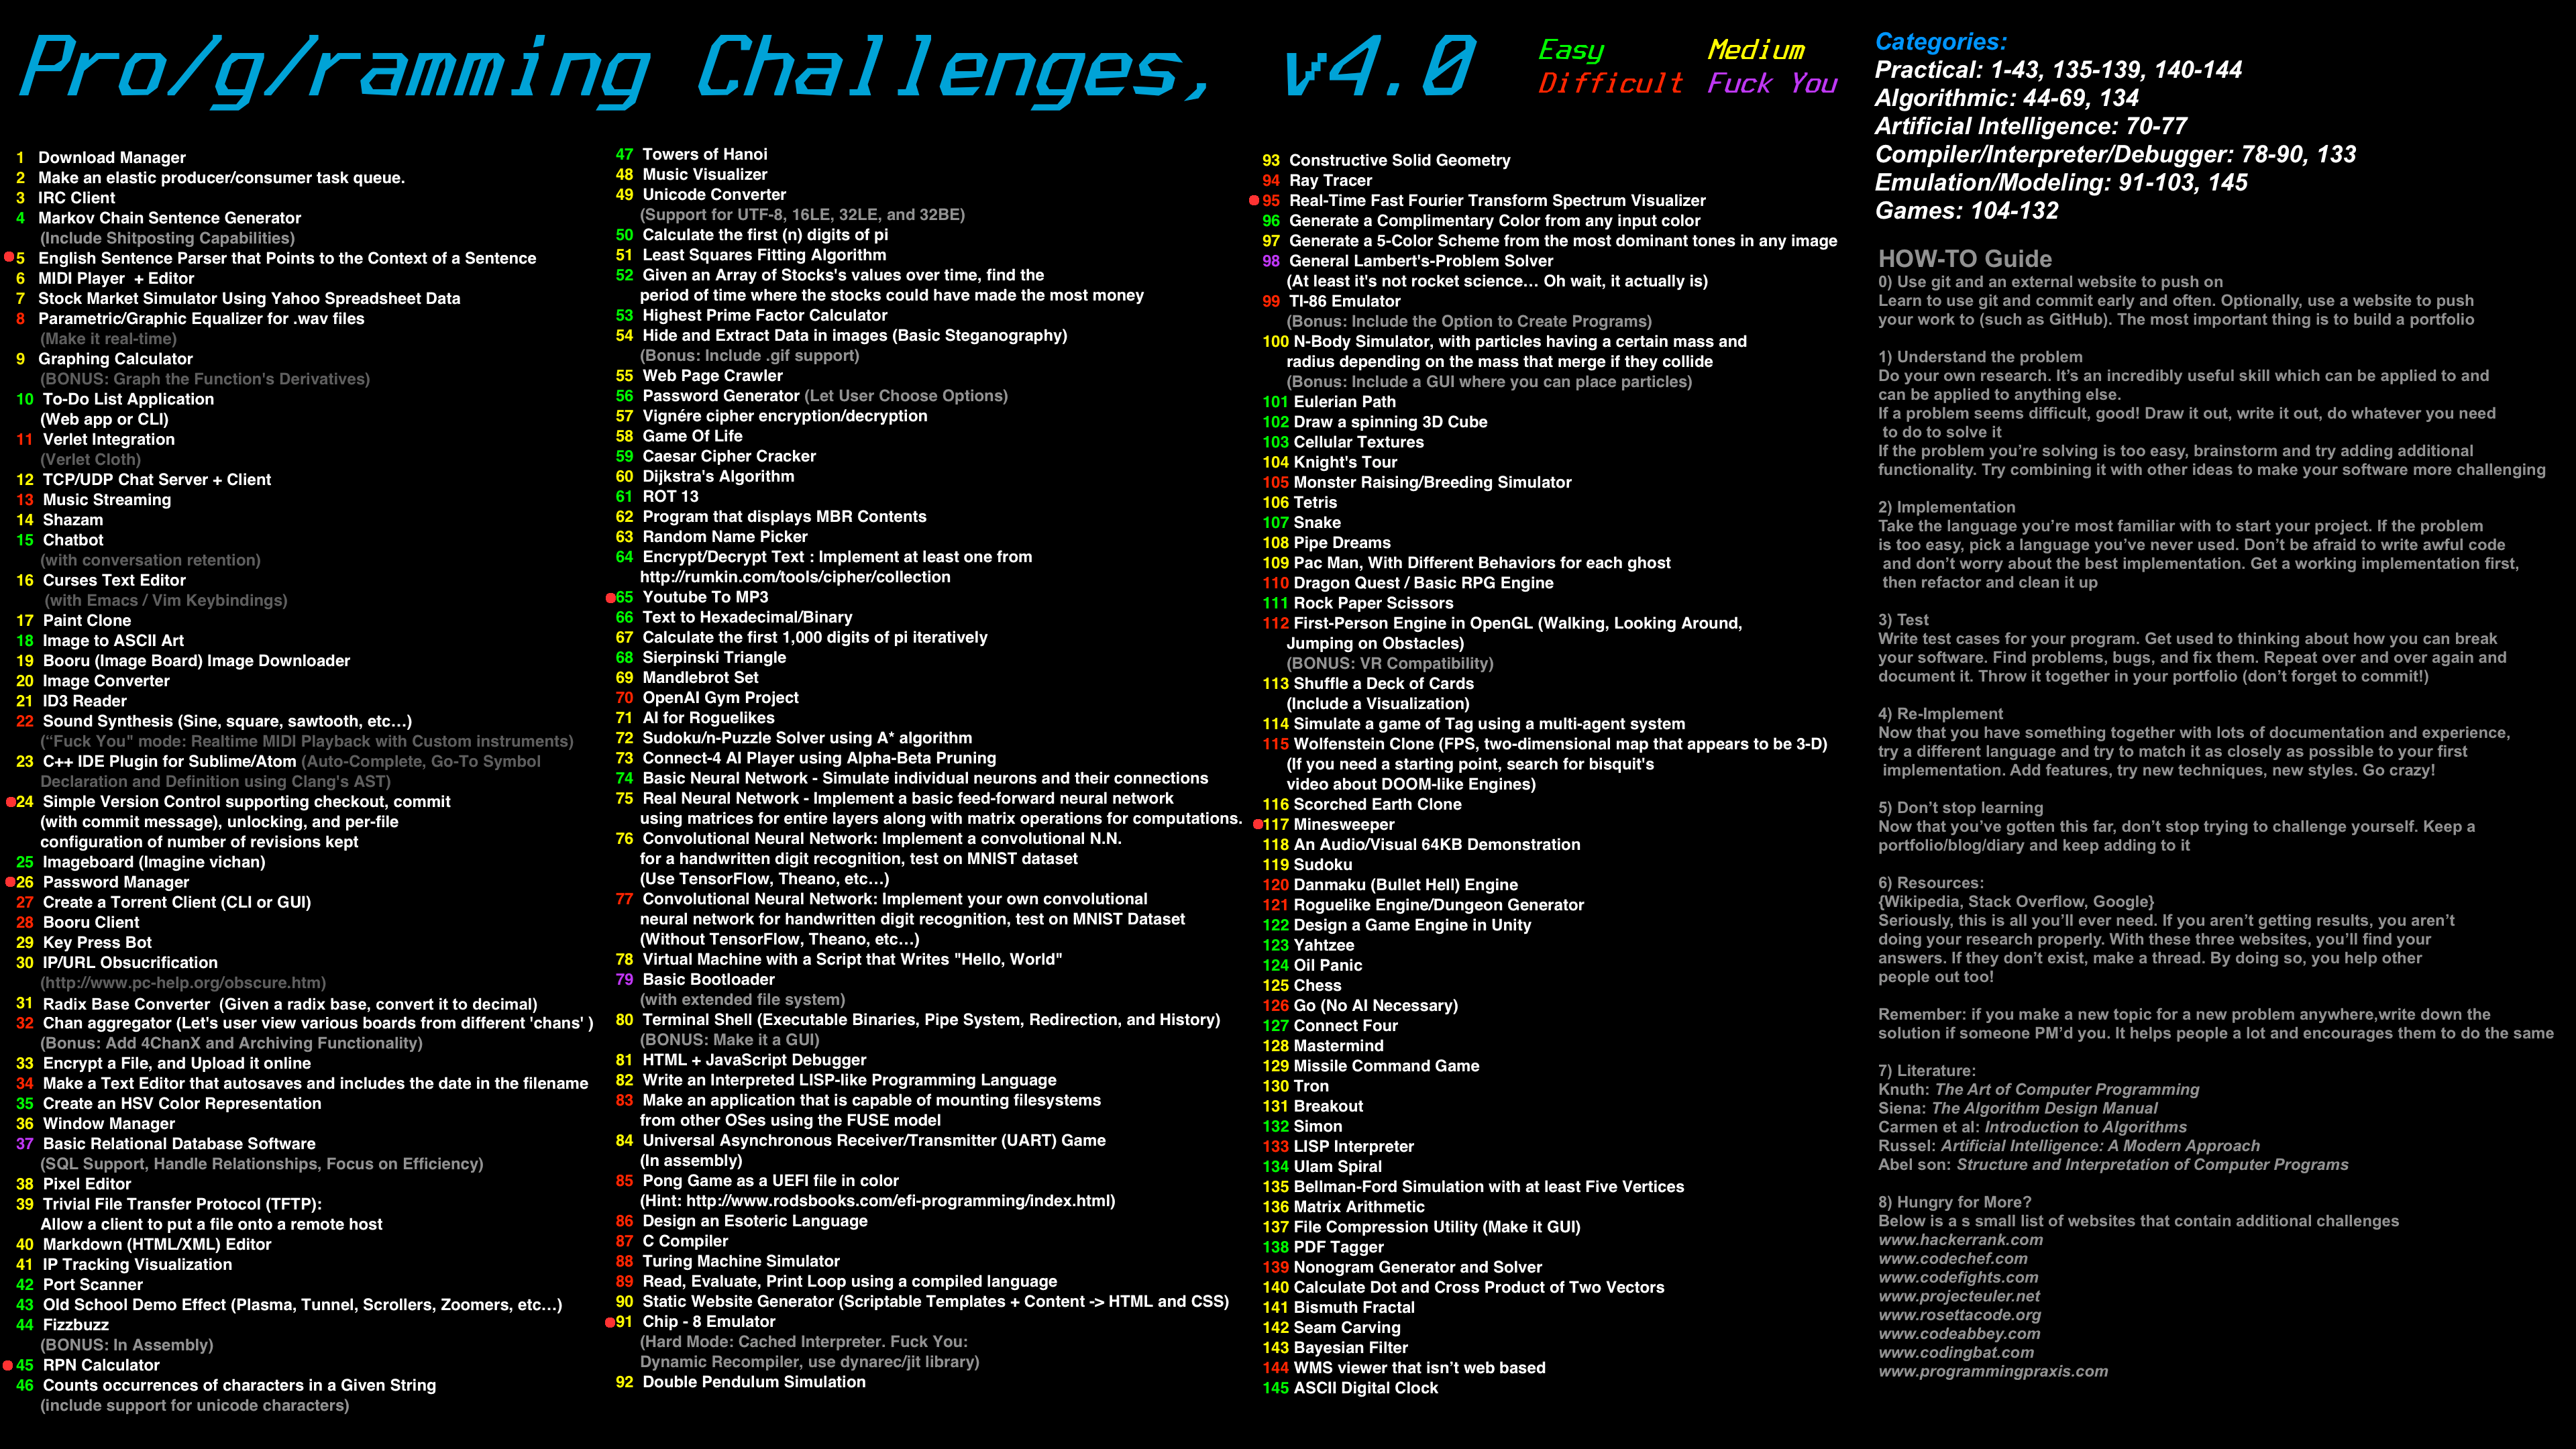 All challenges